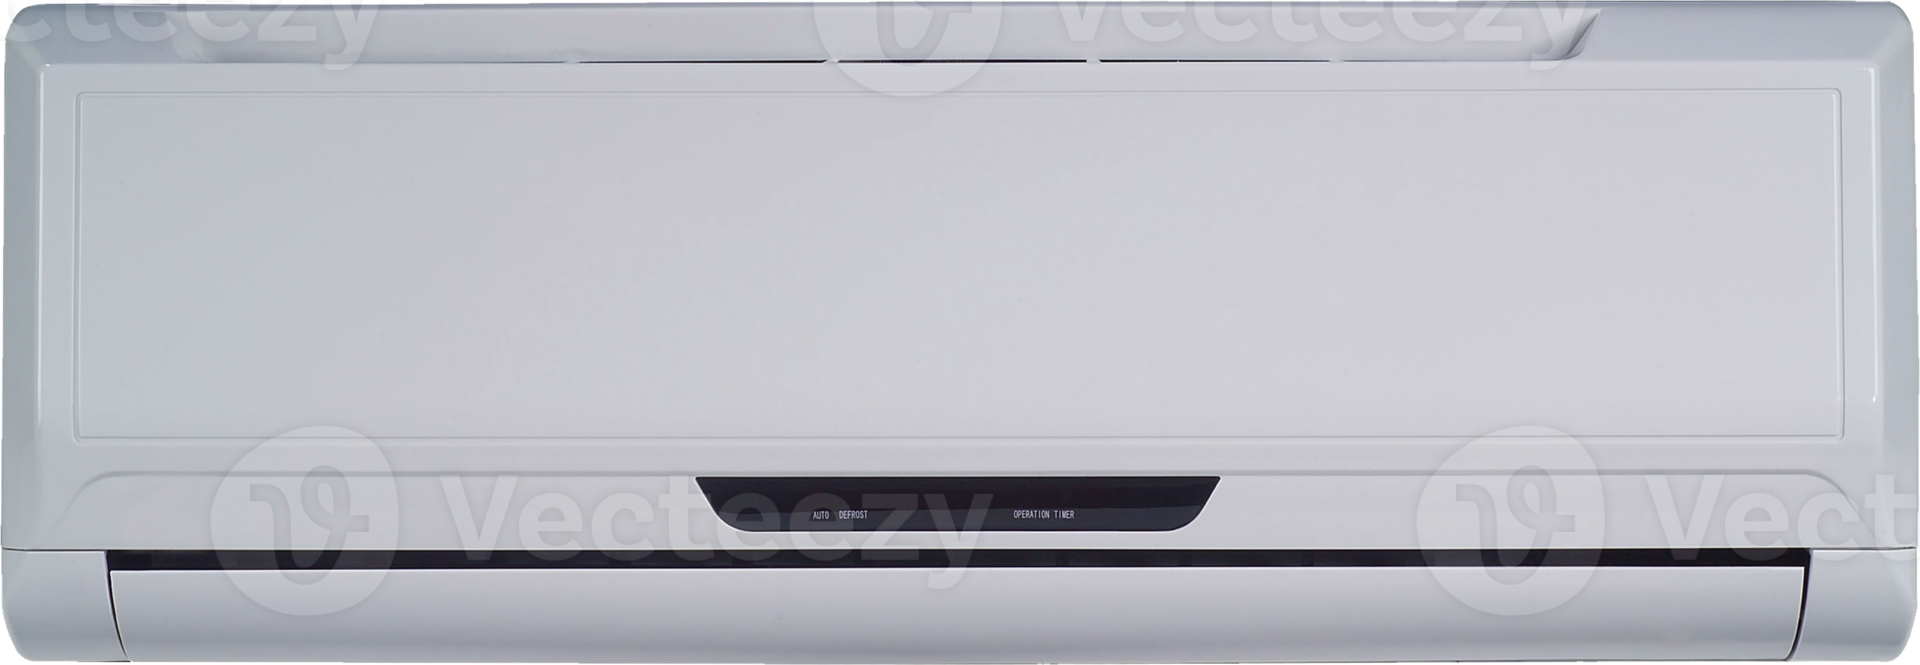 air conditioner appliance png